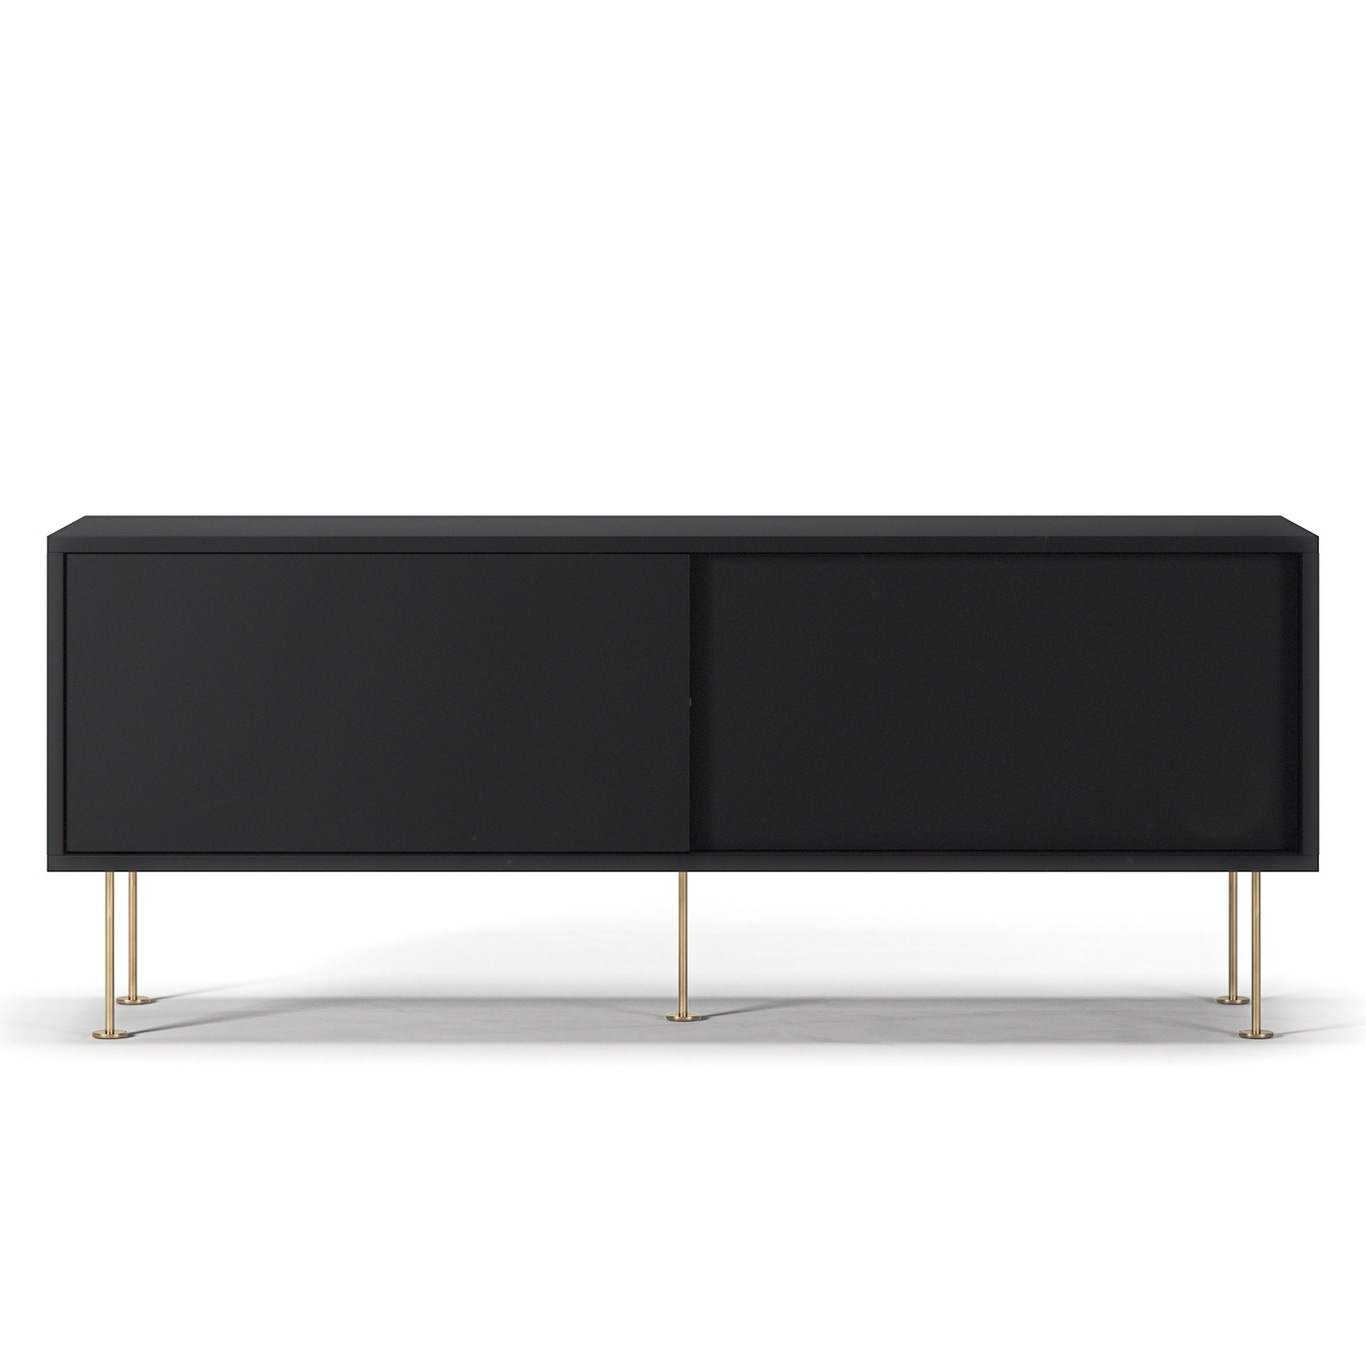 Vogue Media Bench With Legs 136 cm, Anthracite / Brass